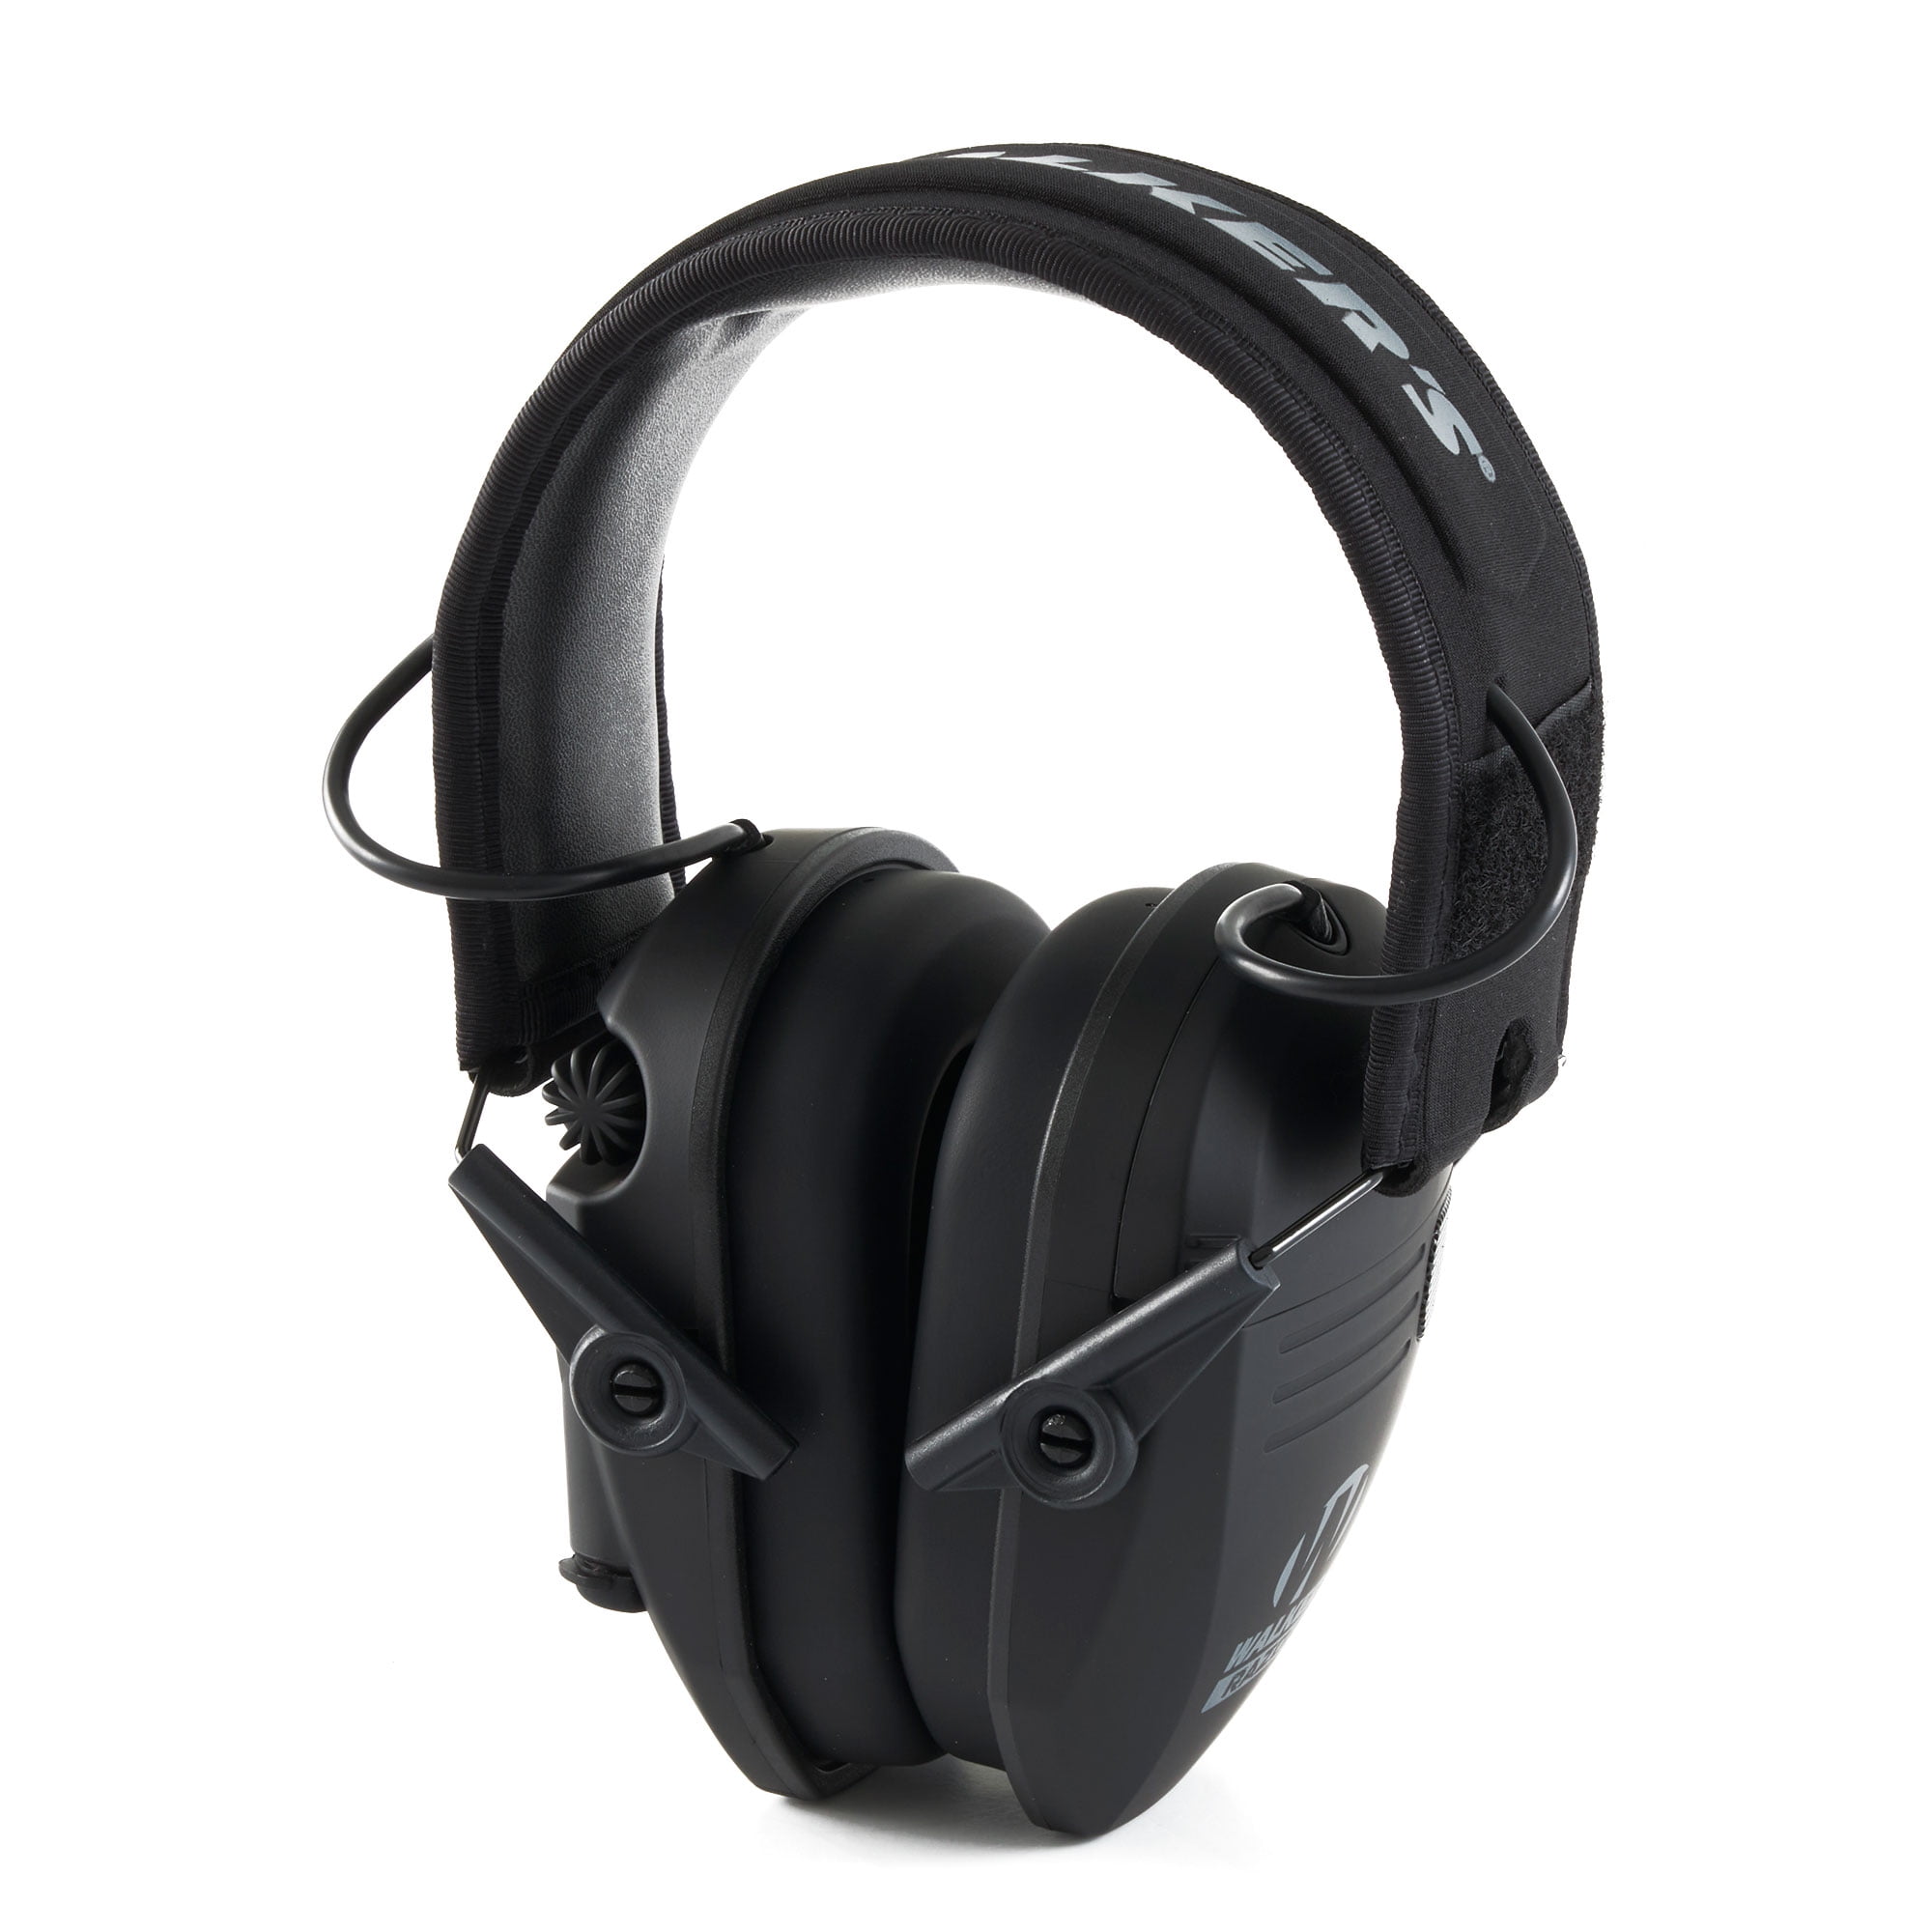 Slim Electronic Ear Muffs For Shooting Range Loud Noise Protection Hearing Gear 